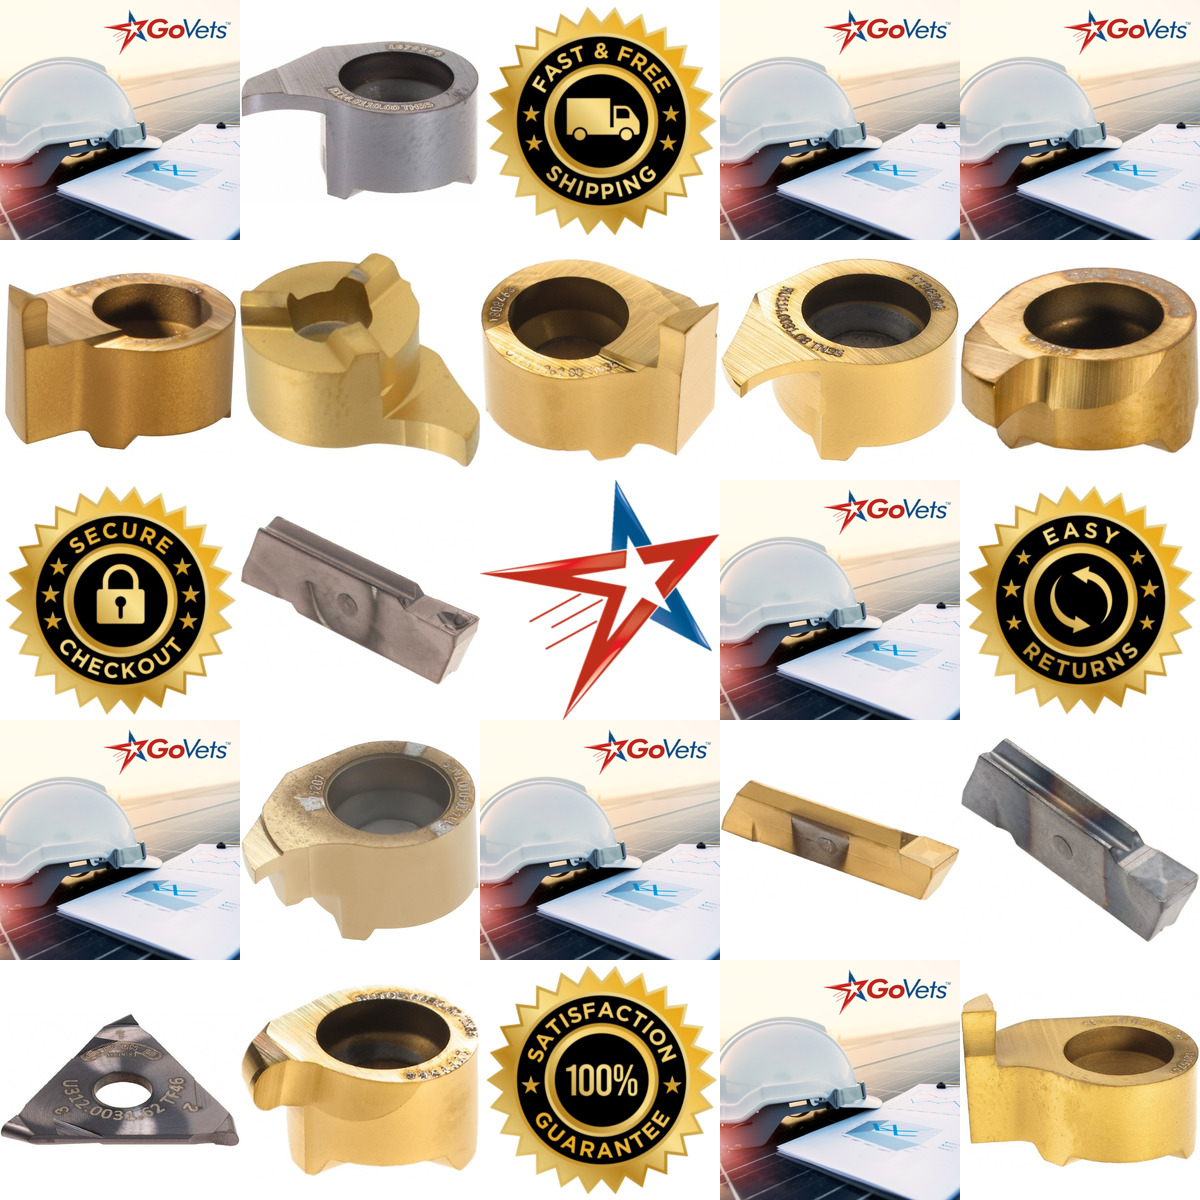 A selection of Horn products on GoVets